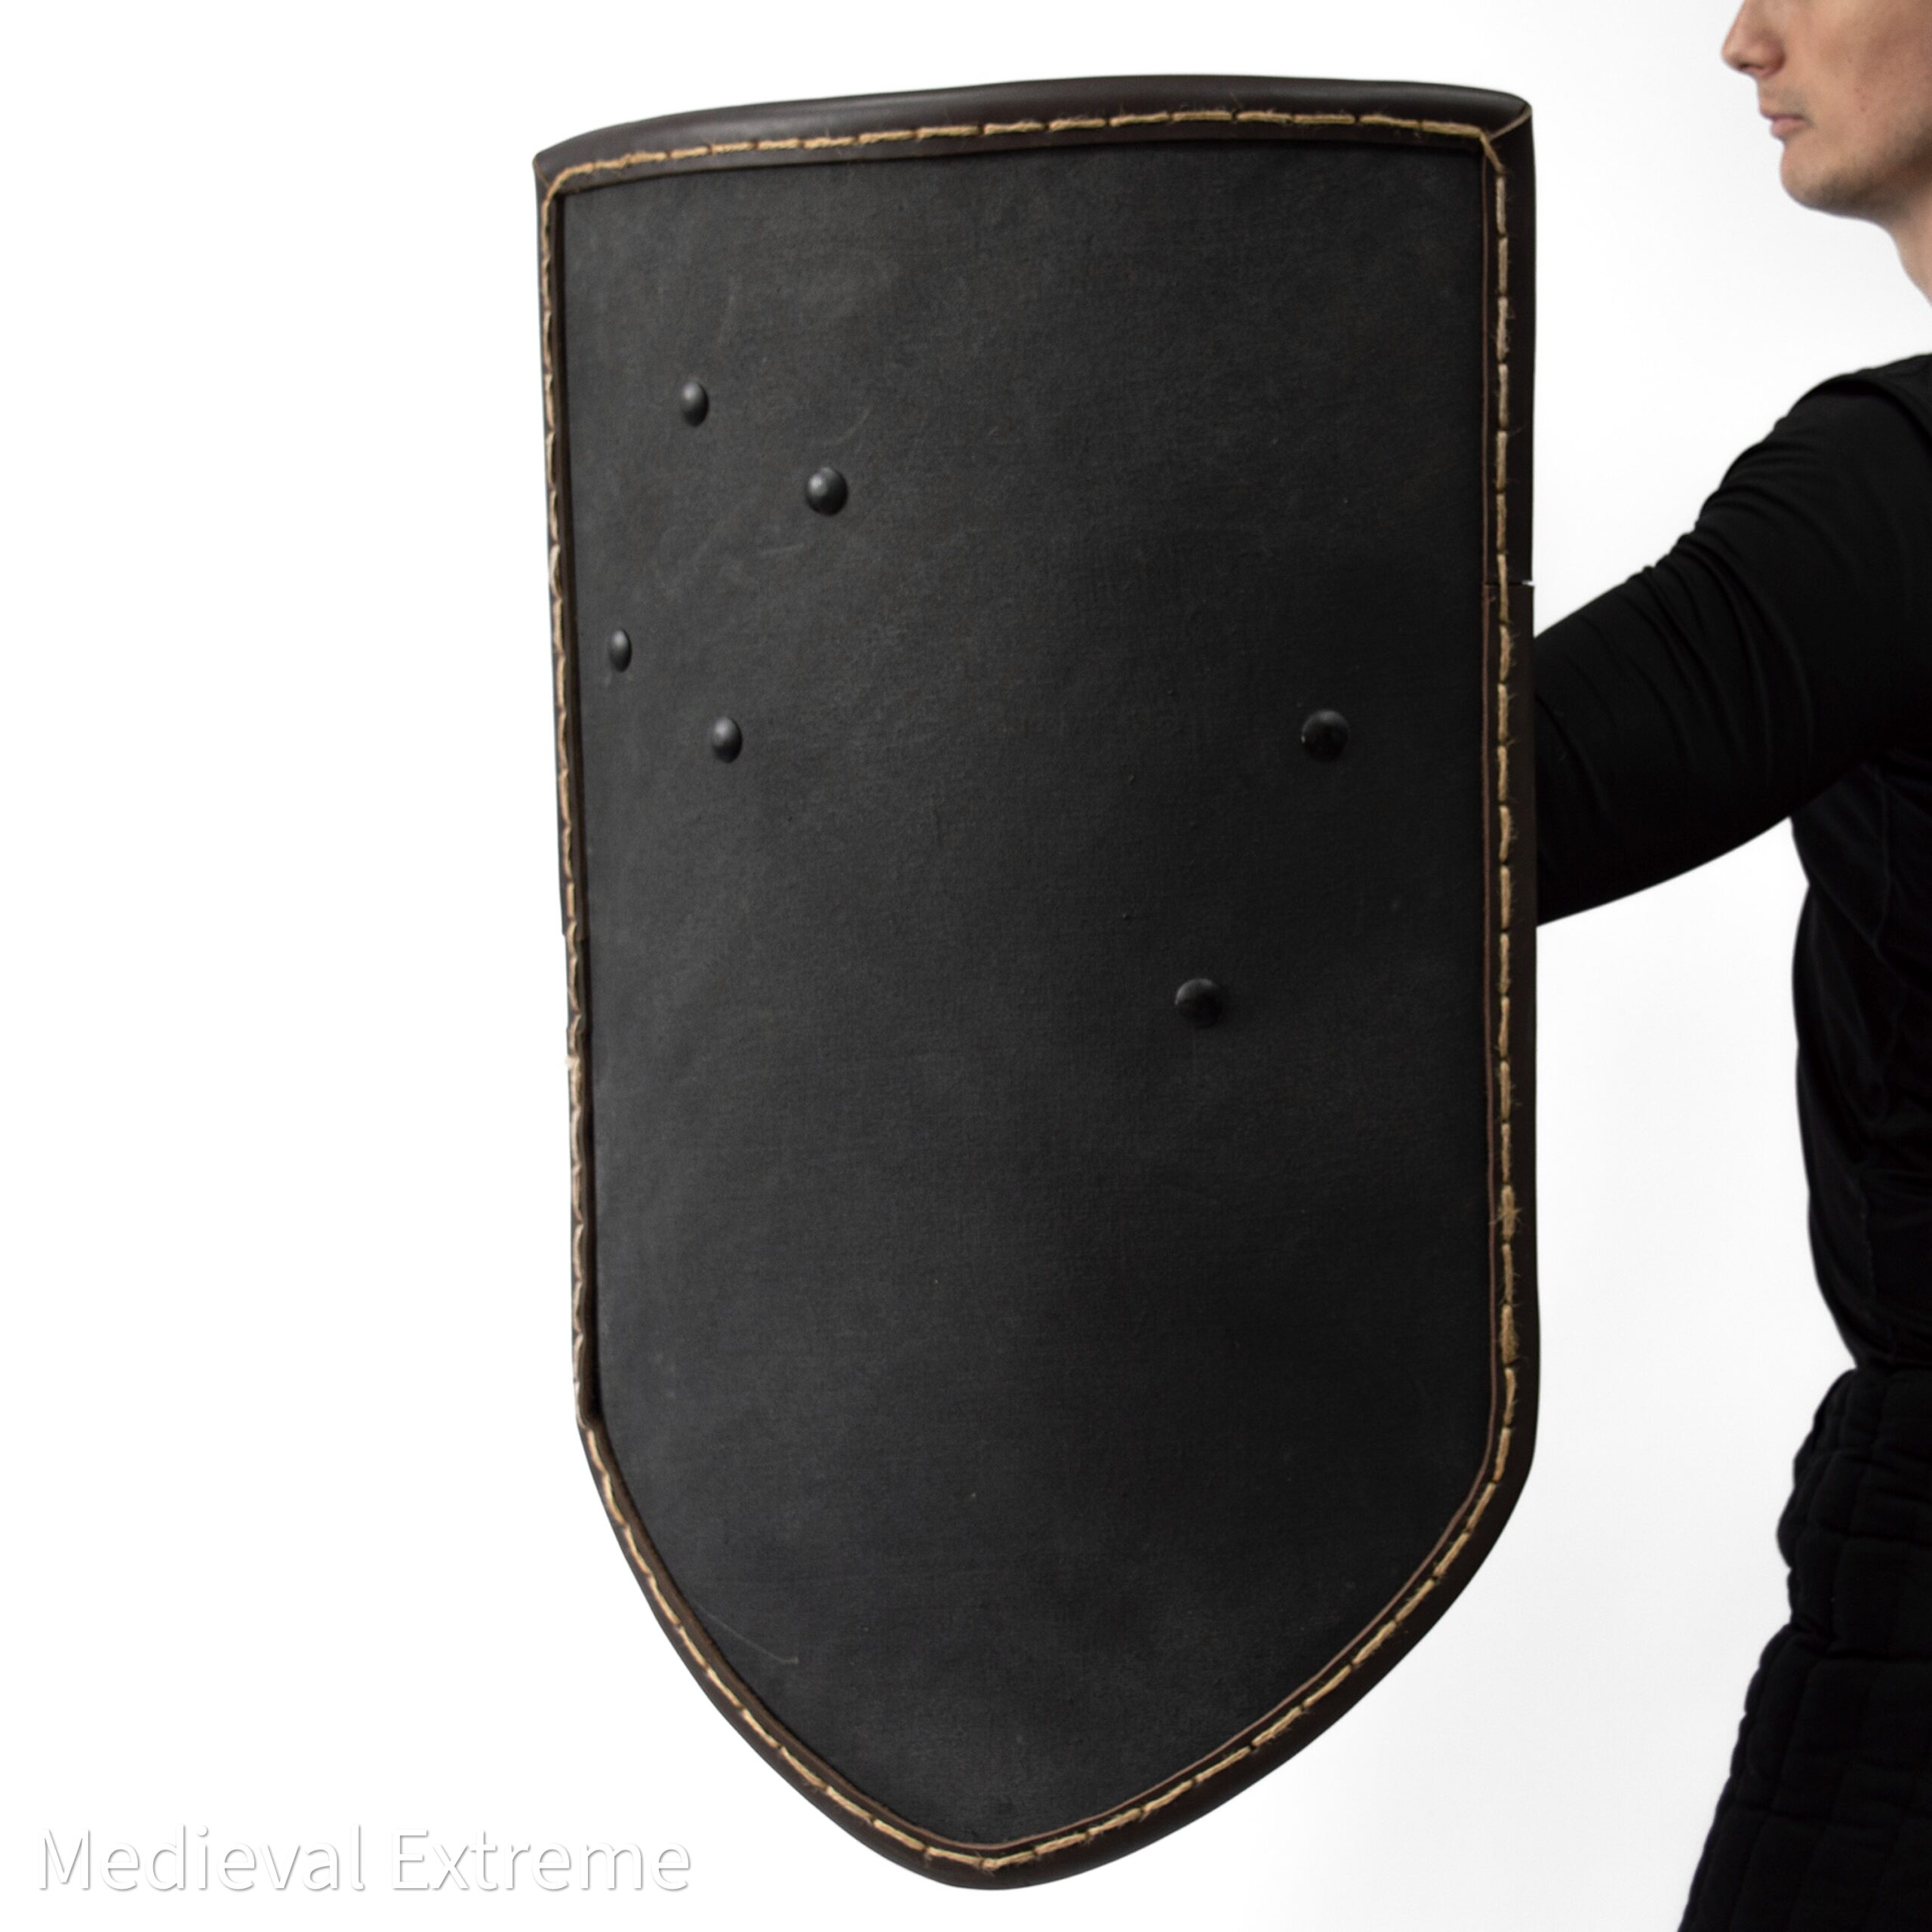 Basic heather shield in hands